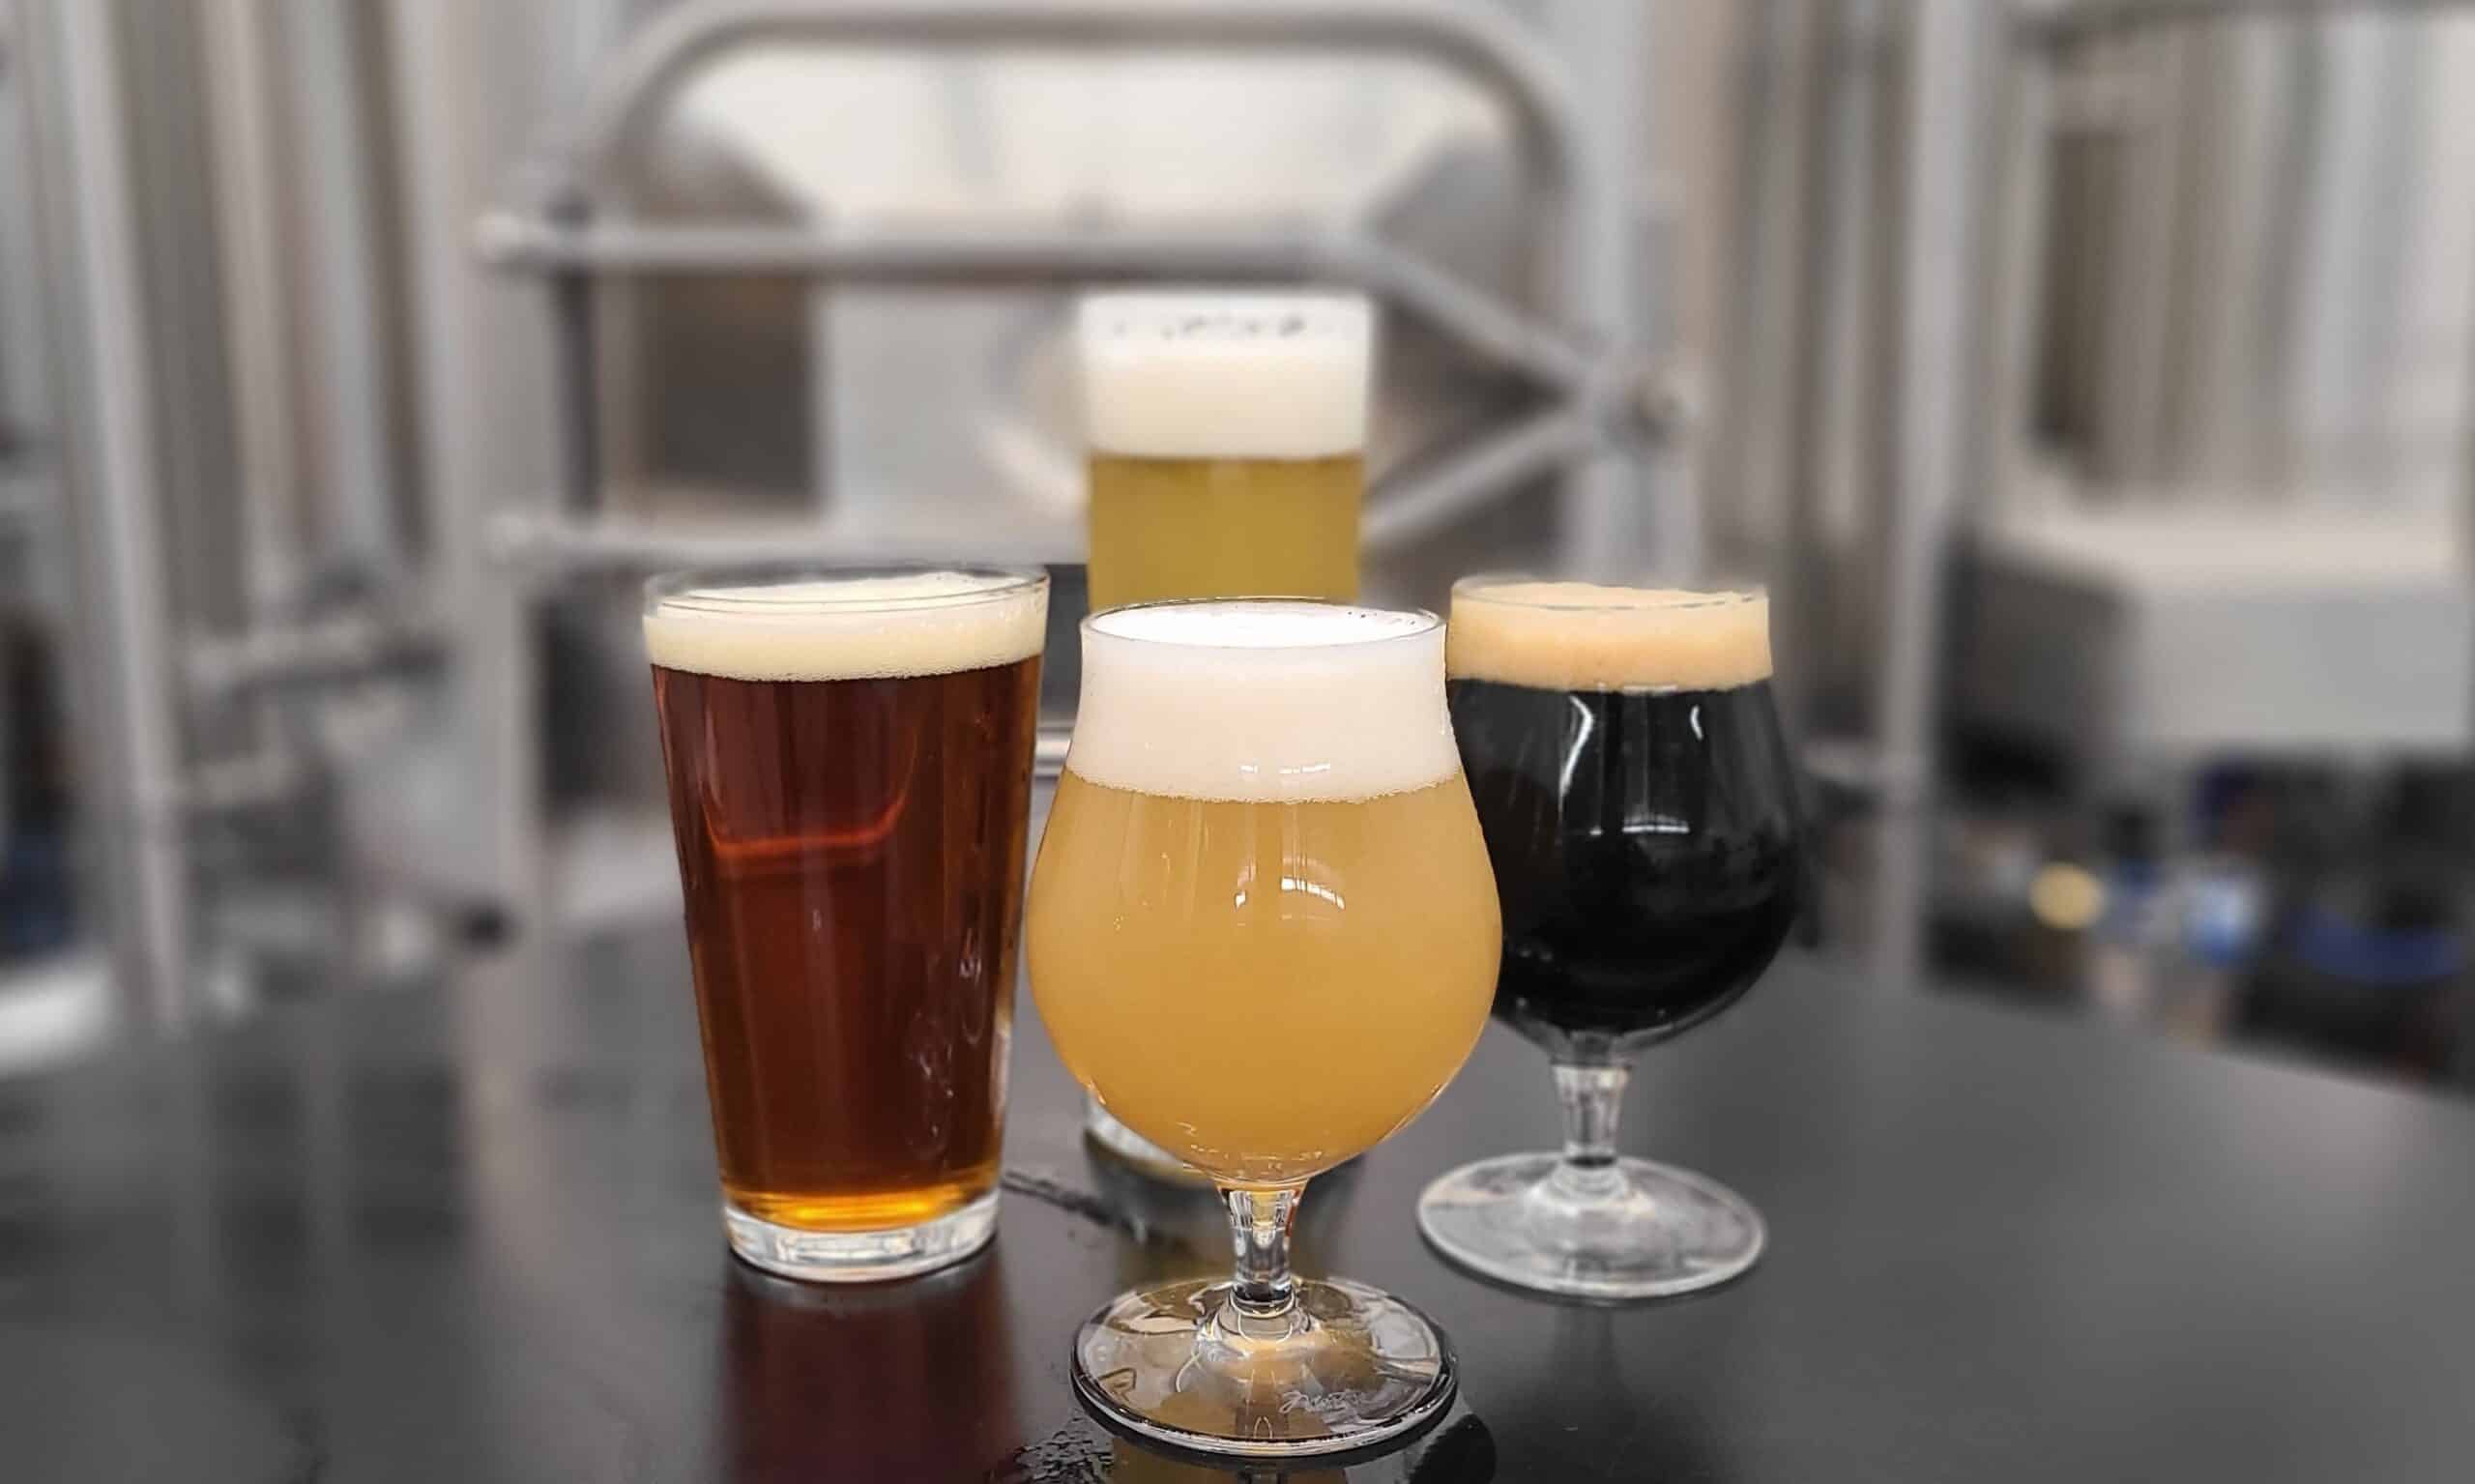 Red Barn Brewing - Beer Variety in Glasses